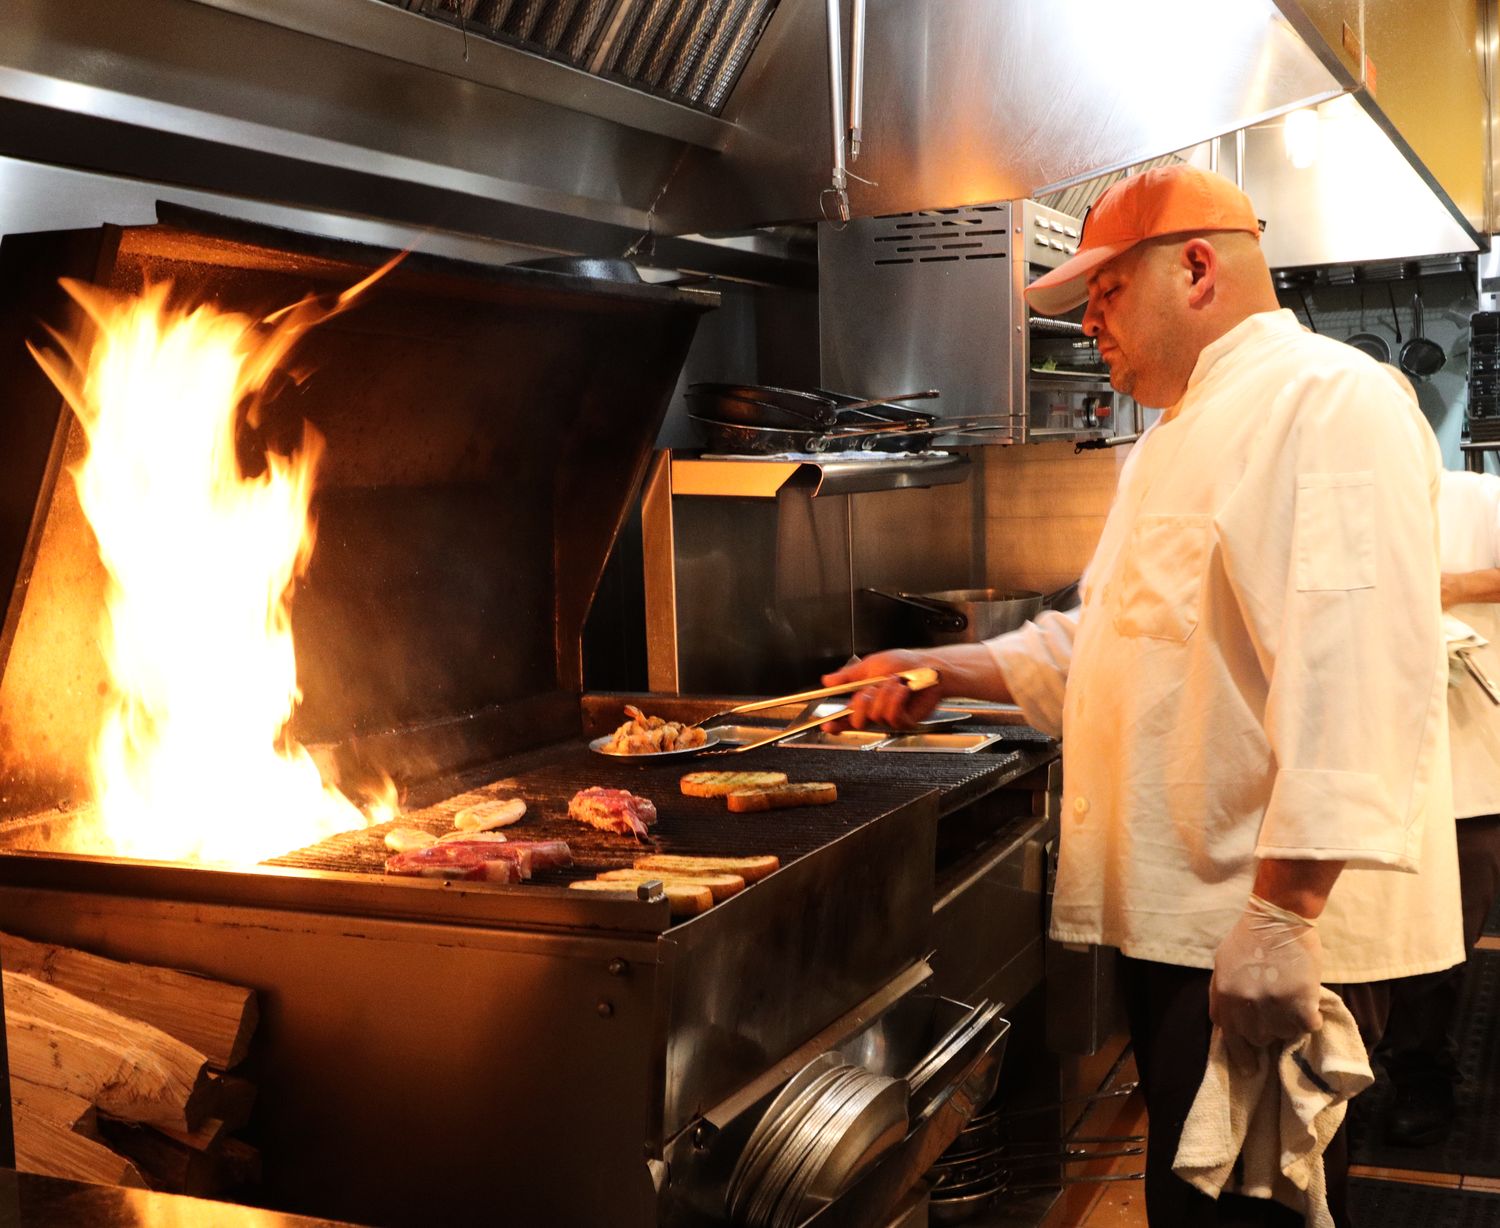 The chef at Matt's Red Rooster Grill in Flemington prepares meats on the open wood fired grill.